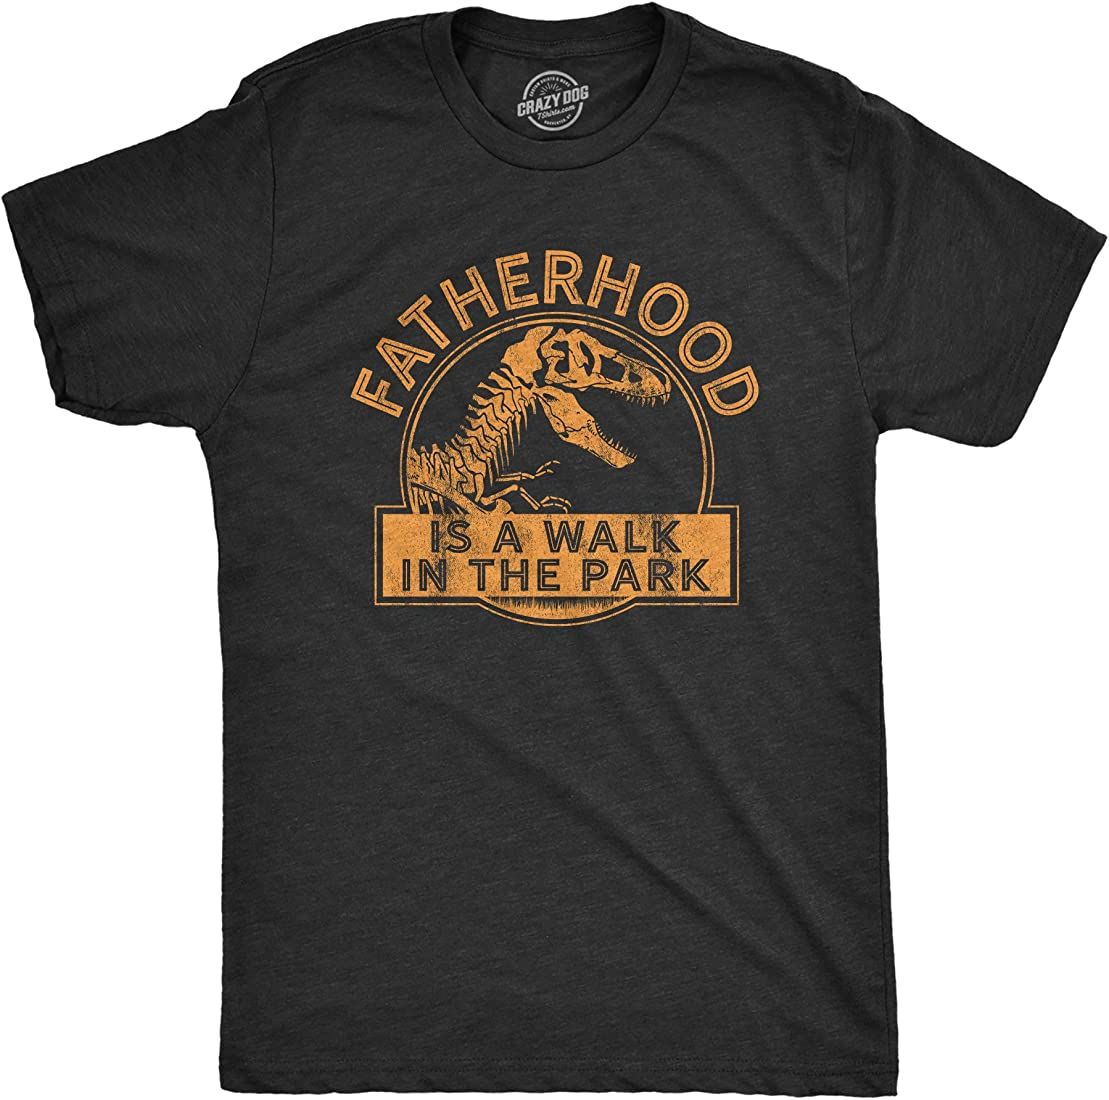 Mens Fatherhood is A Walk in The Park Tshirt Funny Fathers Day Dinosaur Movie Graphic Tee | Amazon (US)